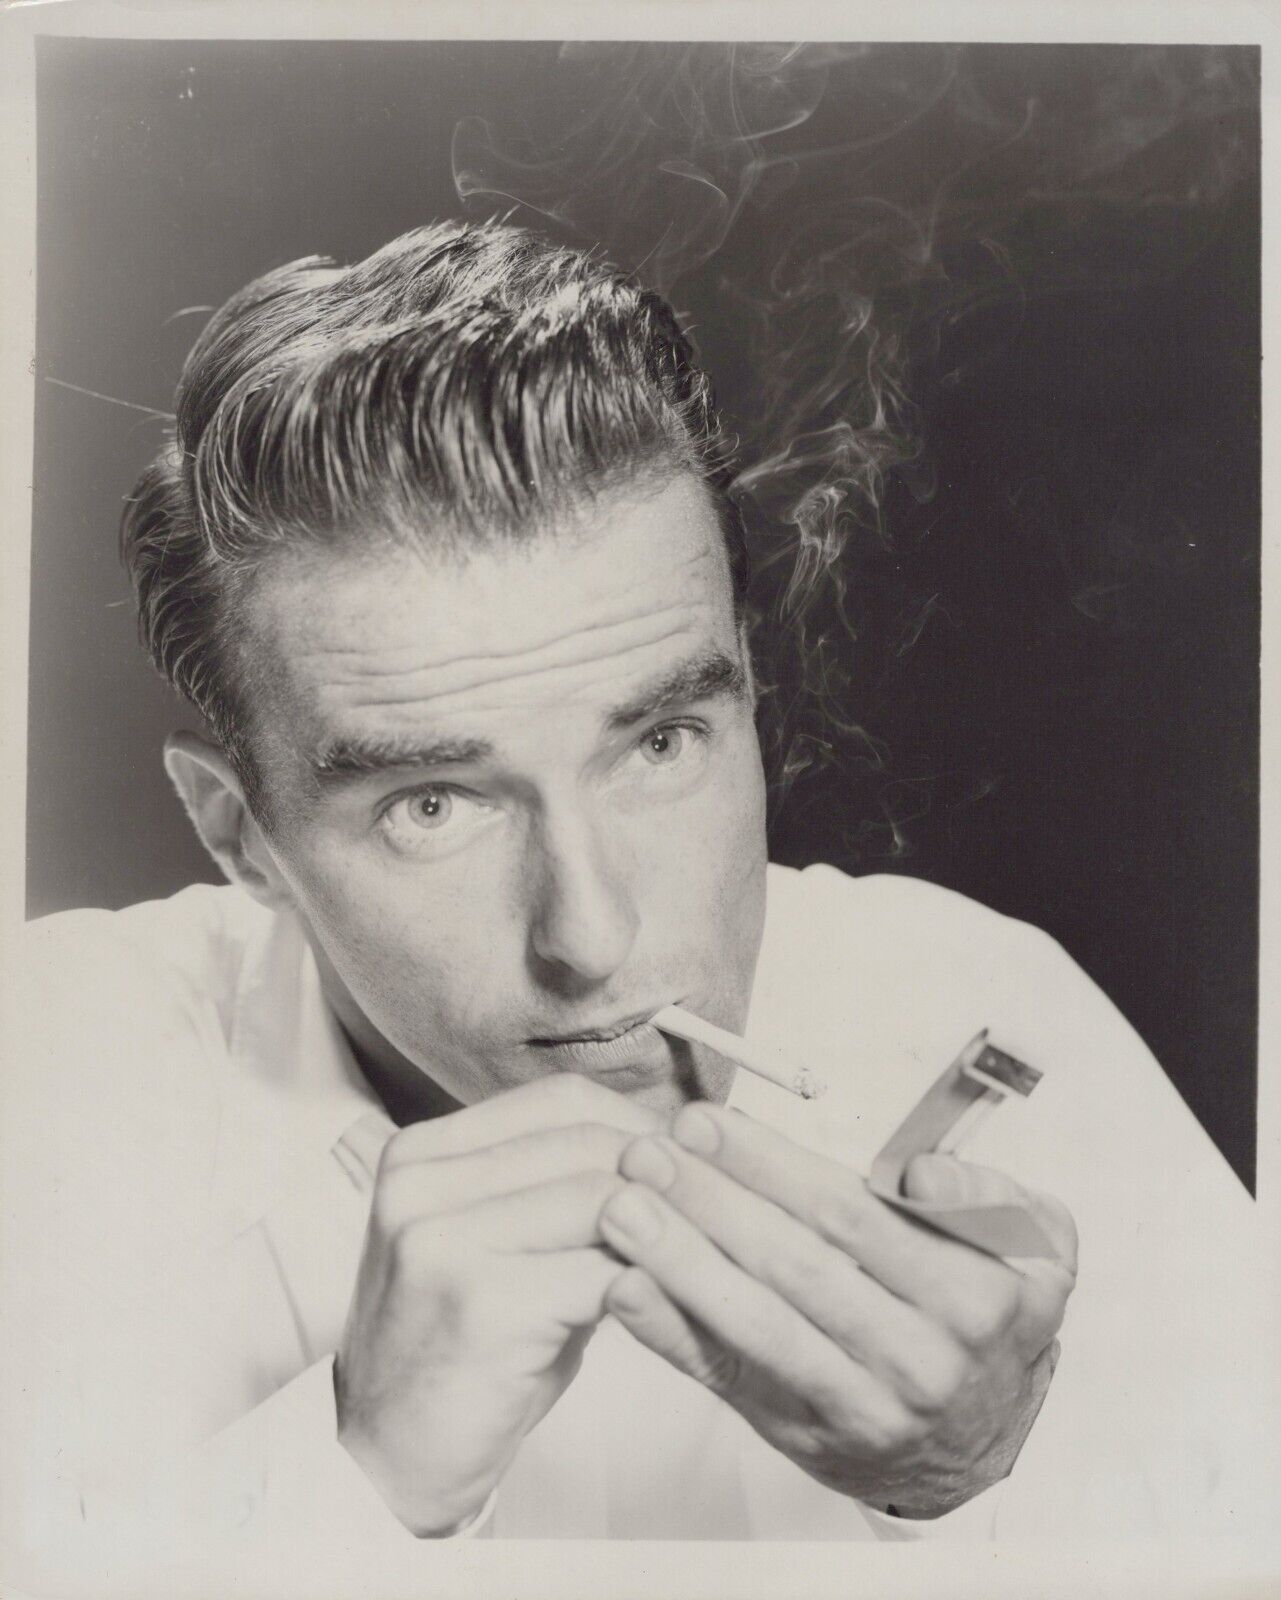 Montgomery Clift (1950s) ❤ Handsome Hollywood Collectable Vintage Photo K 522